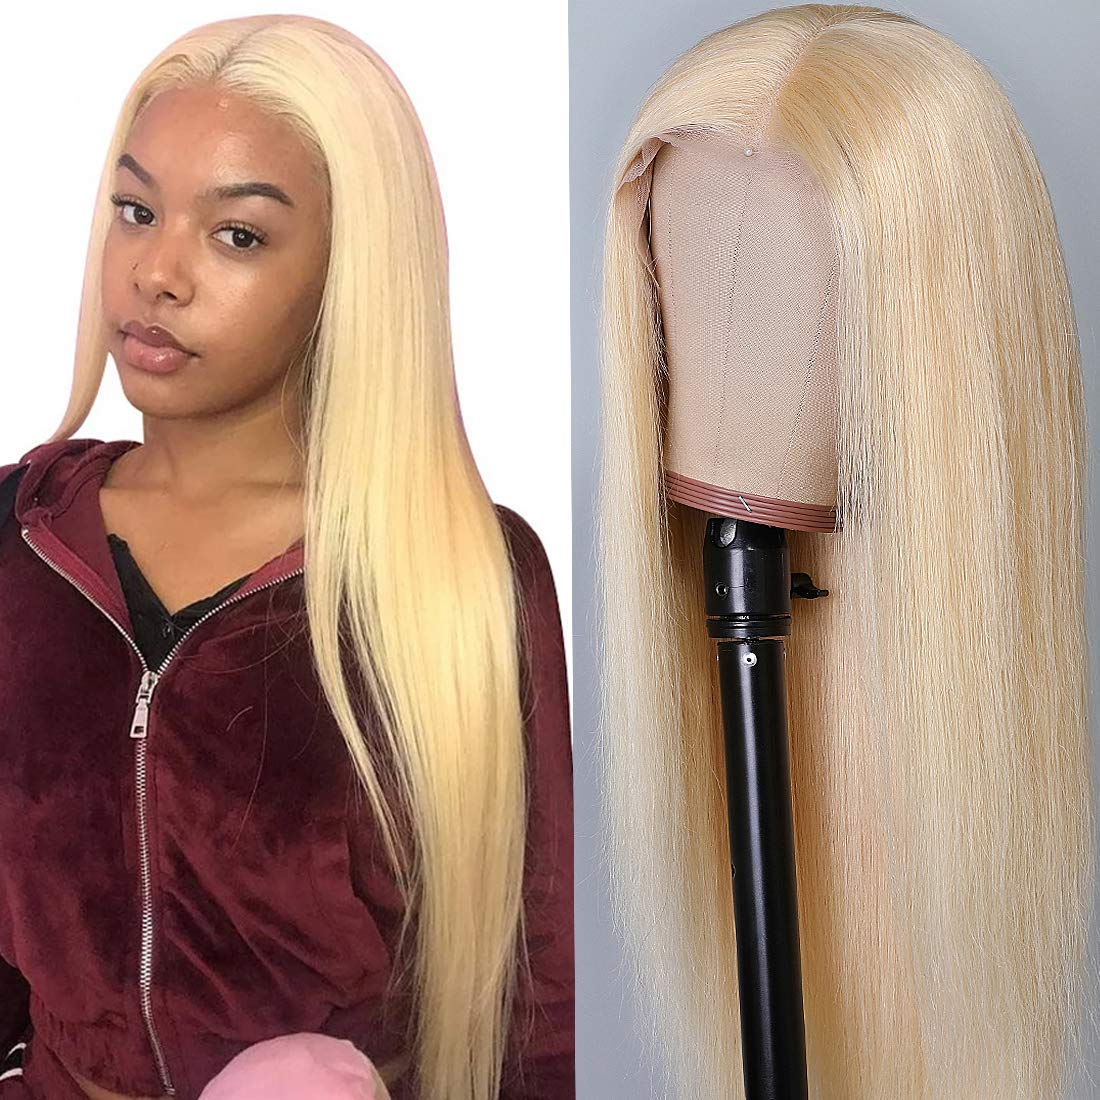 Price:$285.53     Beauty Forever 613 Blonde 13x6 Lace Front Human Hair Wigs, 150% Density Brazilian Remy Straight hair Lace Frontal Wig Pre Plucked with Baby Hair for Women 22 Inch   Beauty